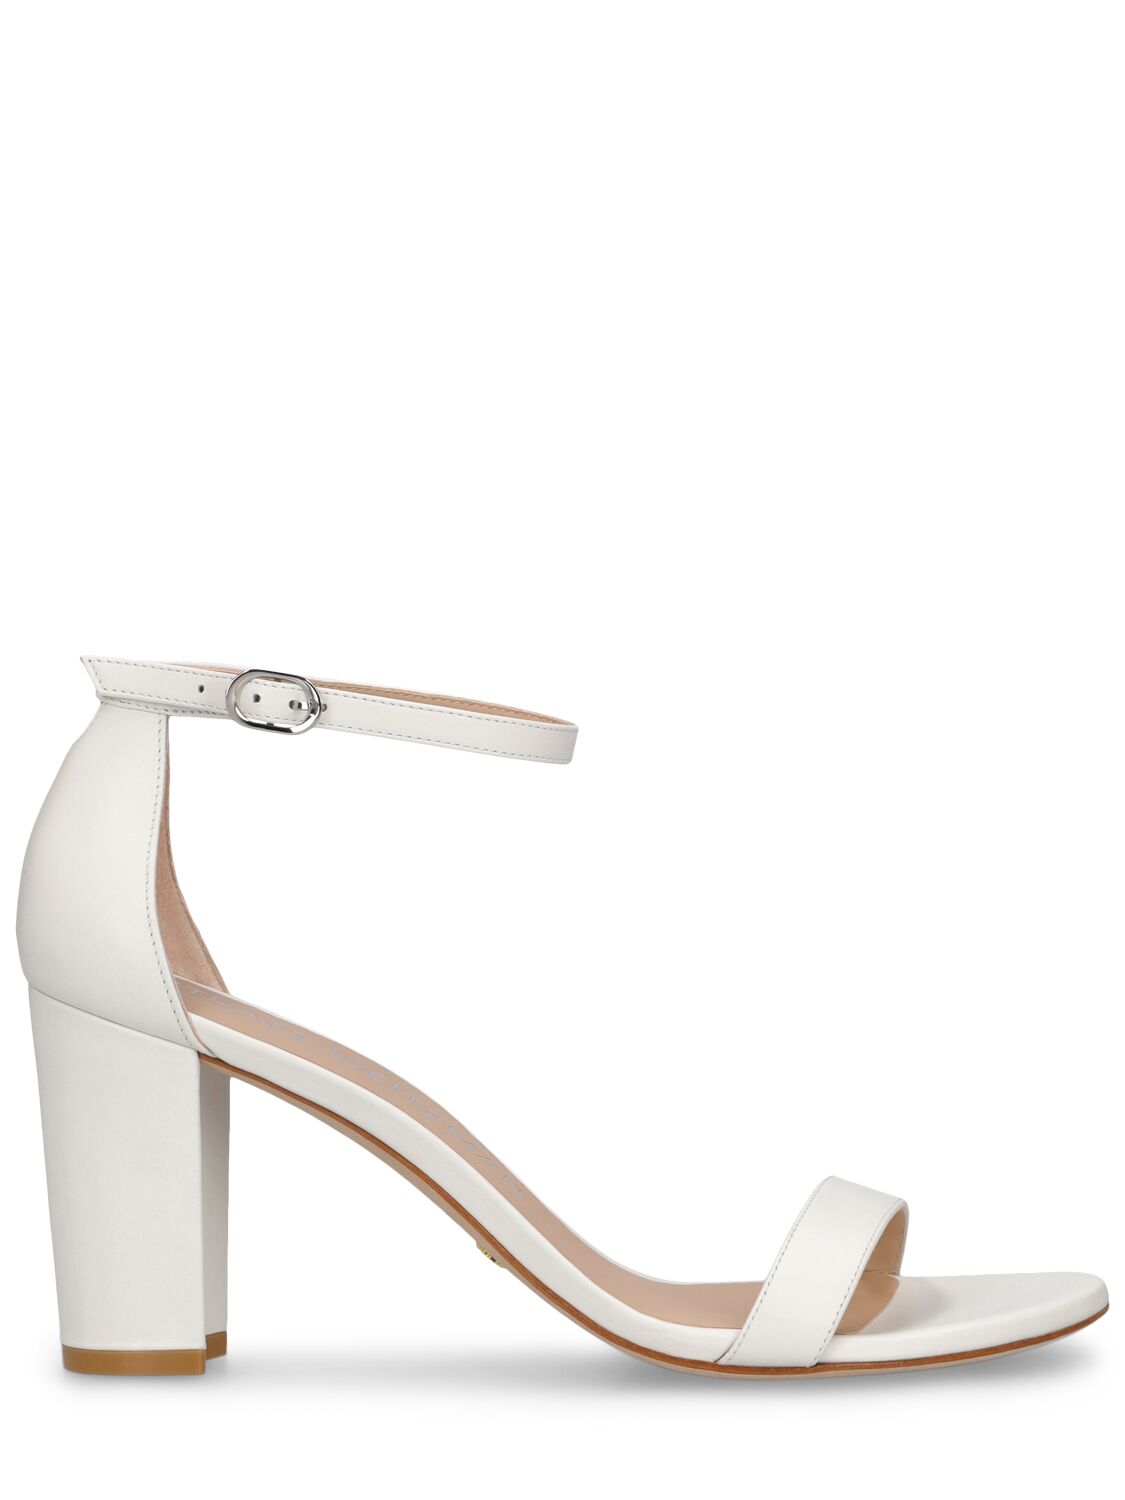 Shop Stuart Weitzman 80mm Nearly Nude Leather Sandals In White